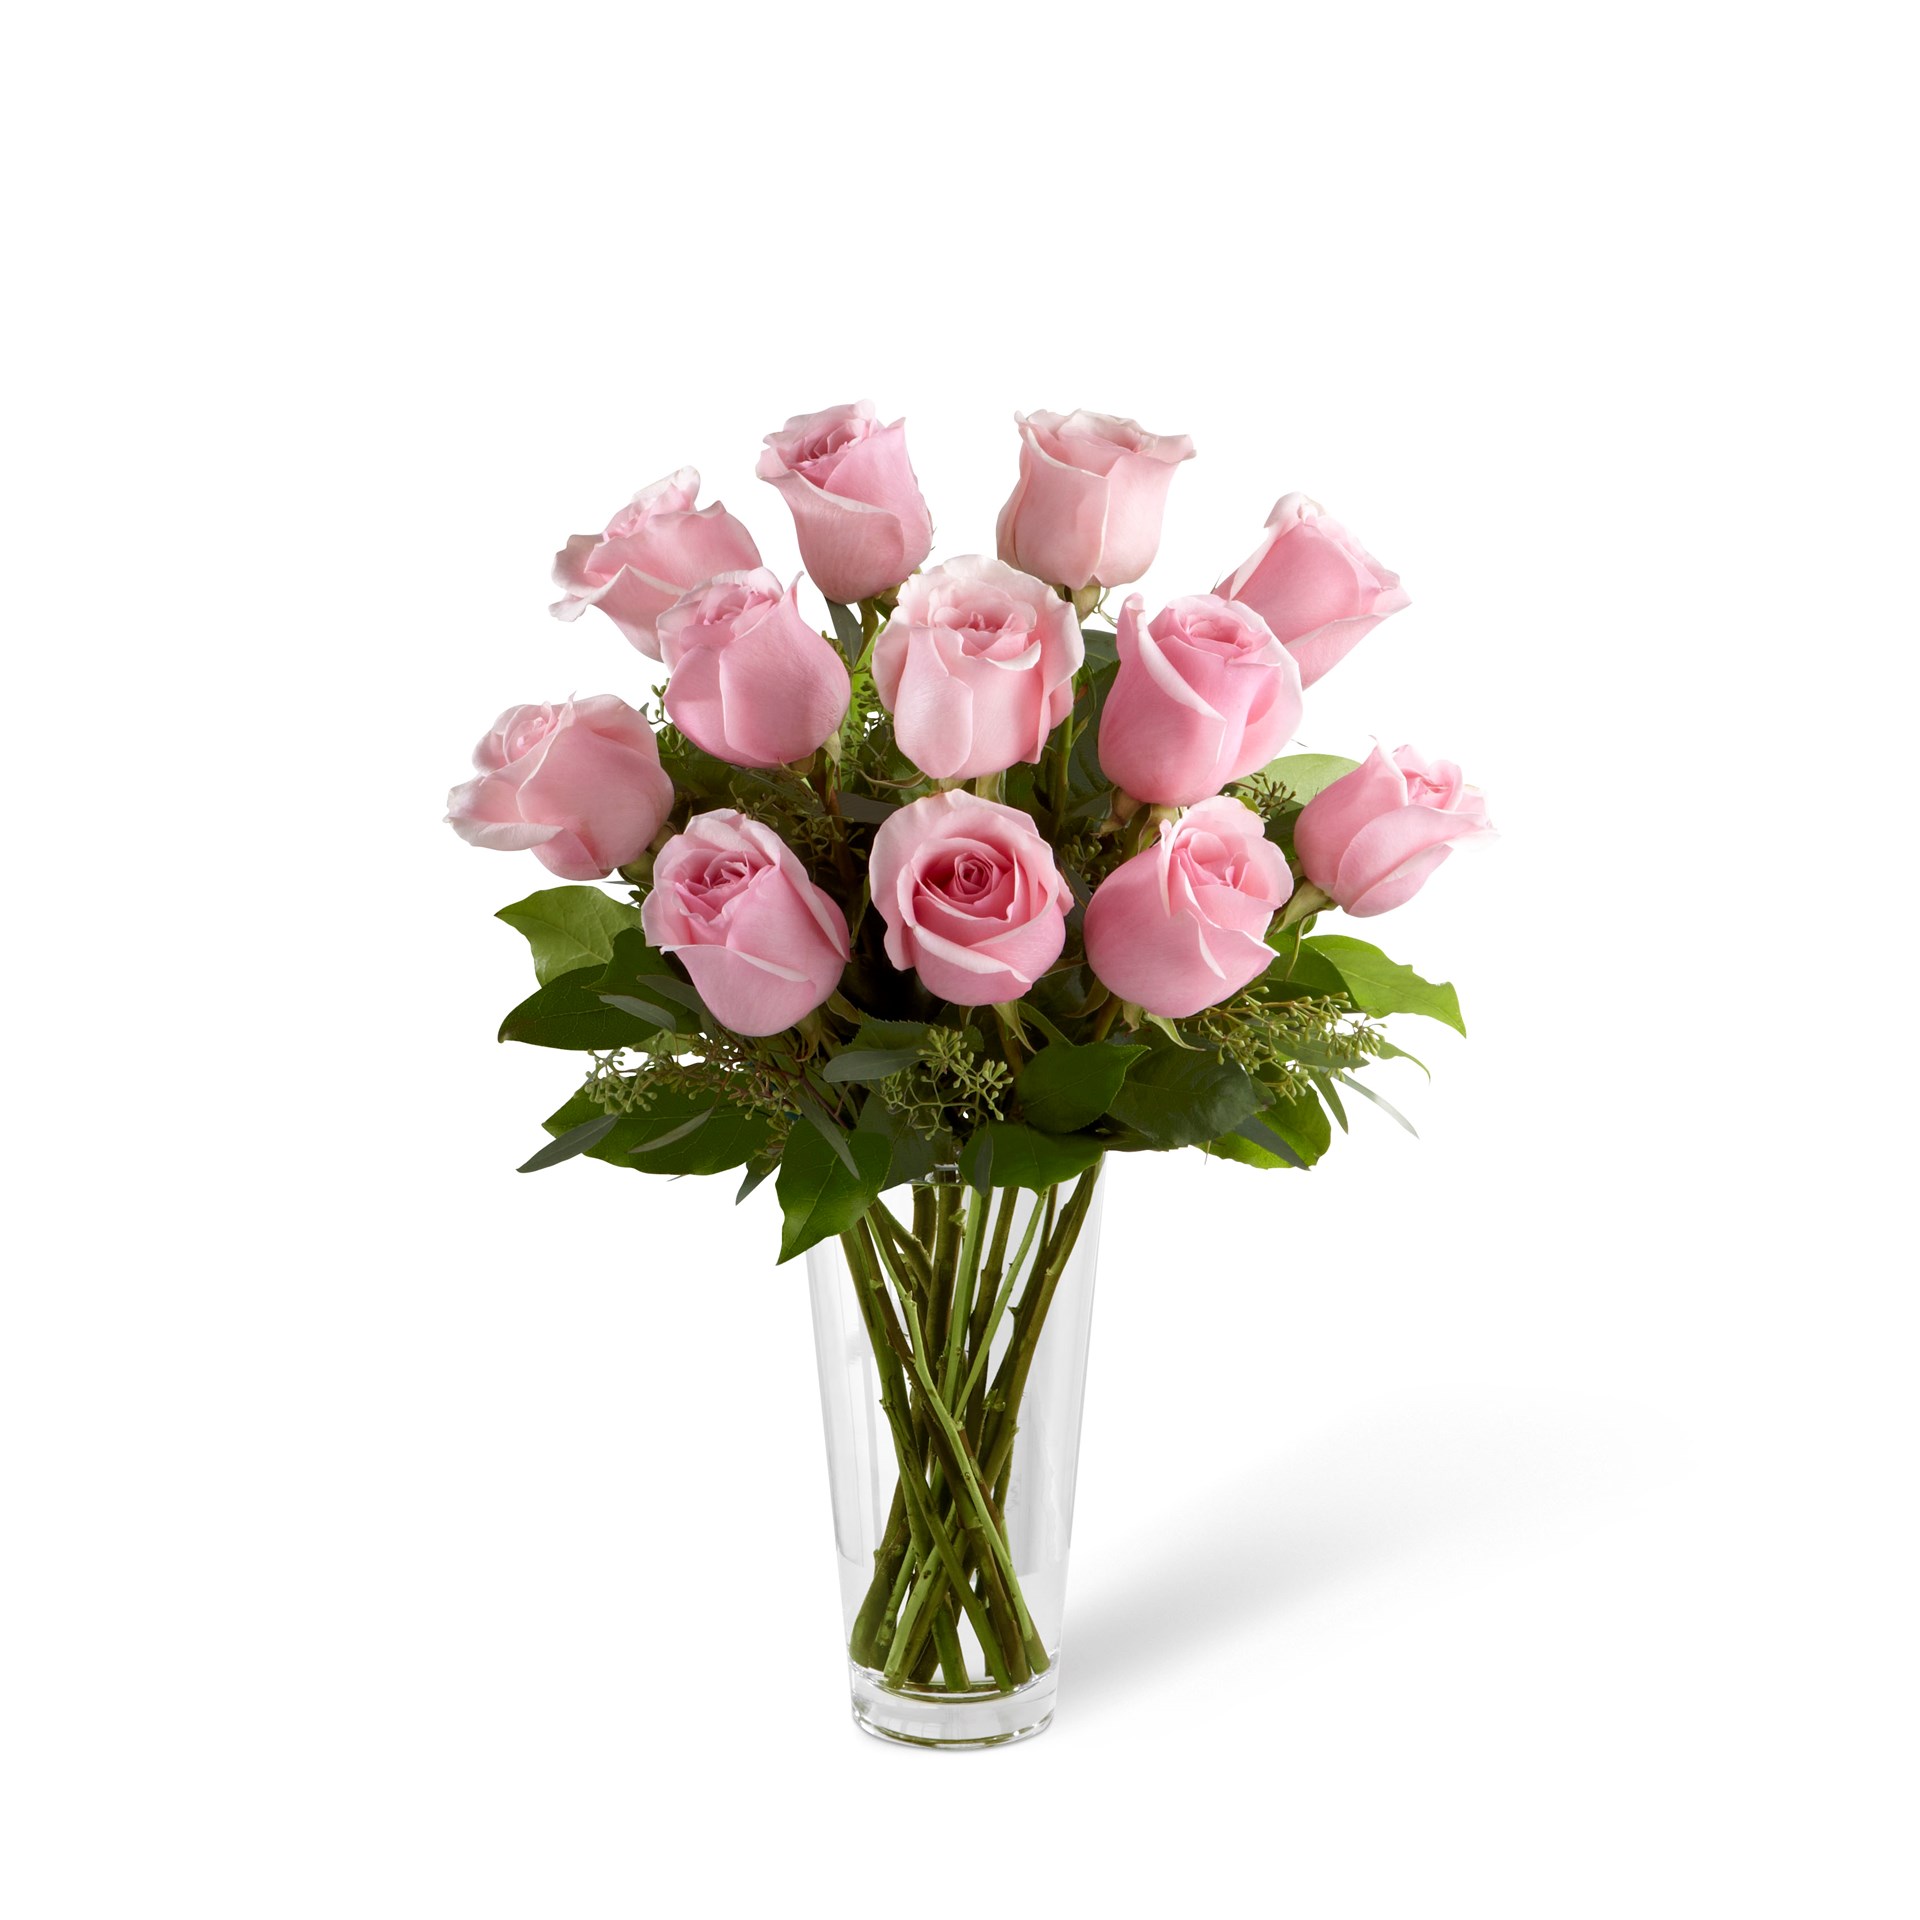 product image for The Long Stem Pink Rose Bouquet by FTD - VASE INCLUDED